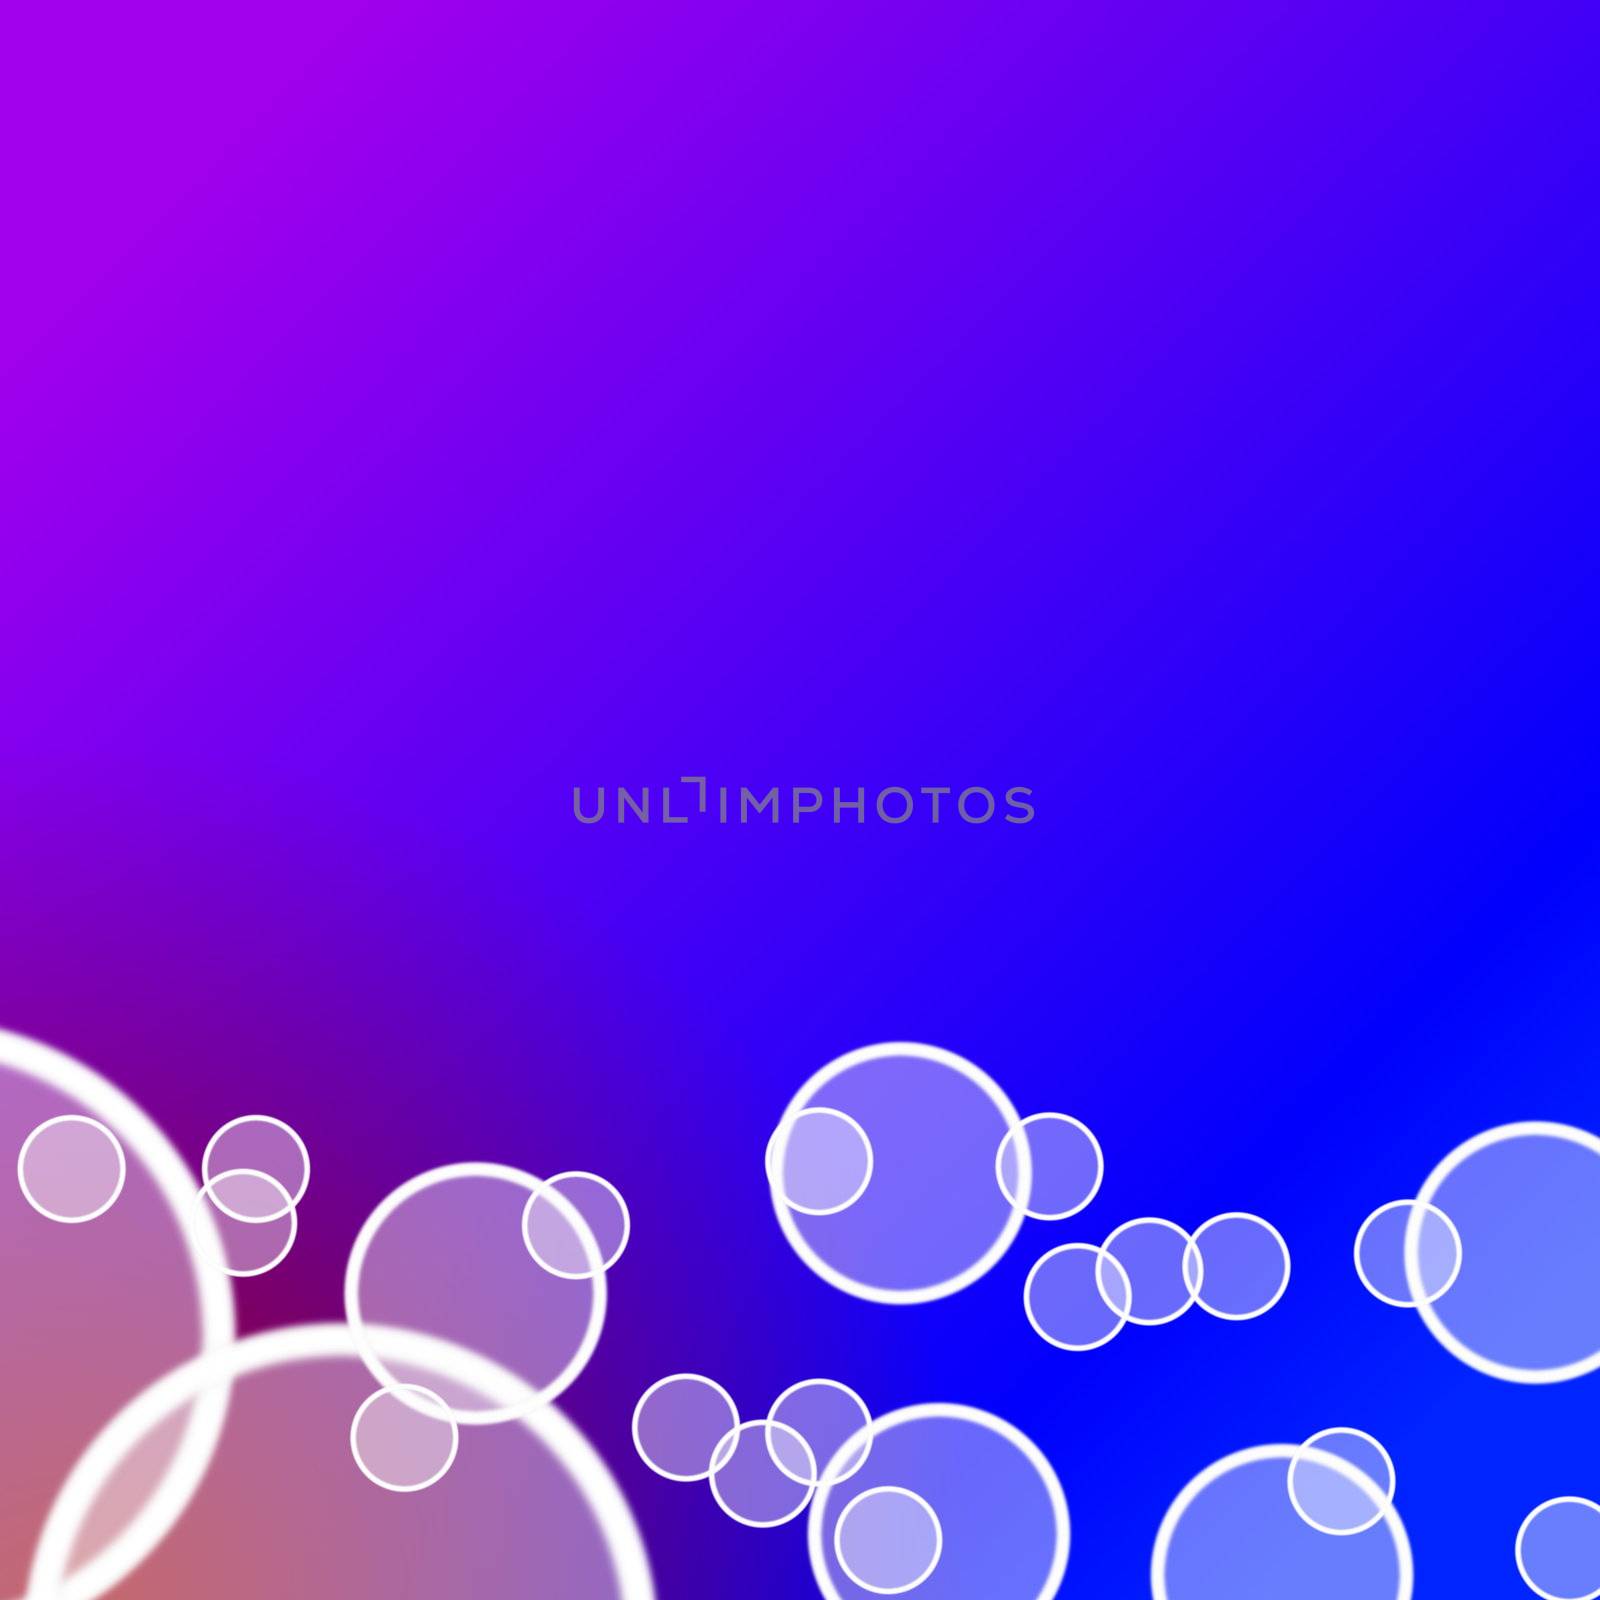 abstract nightlife background with copyspace for text message